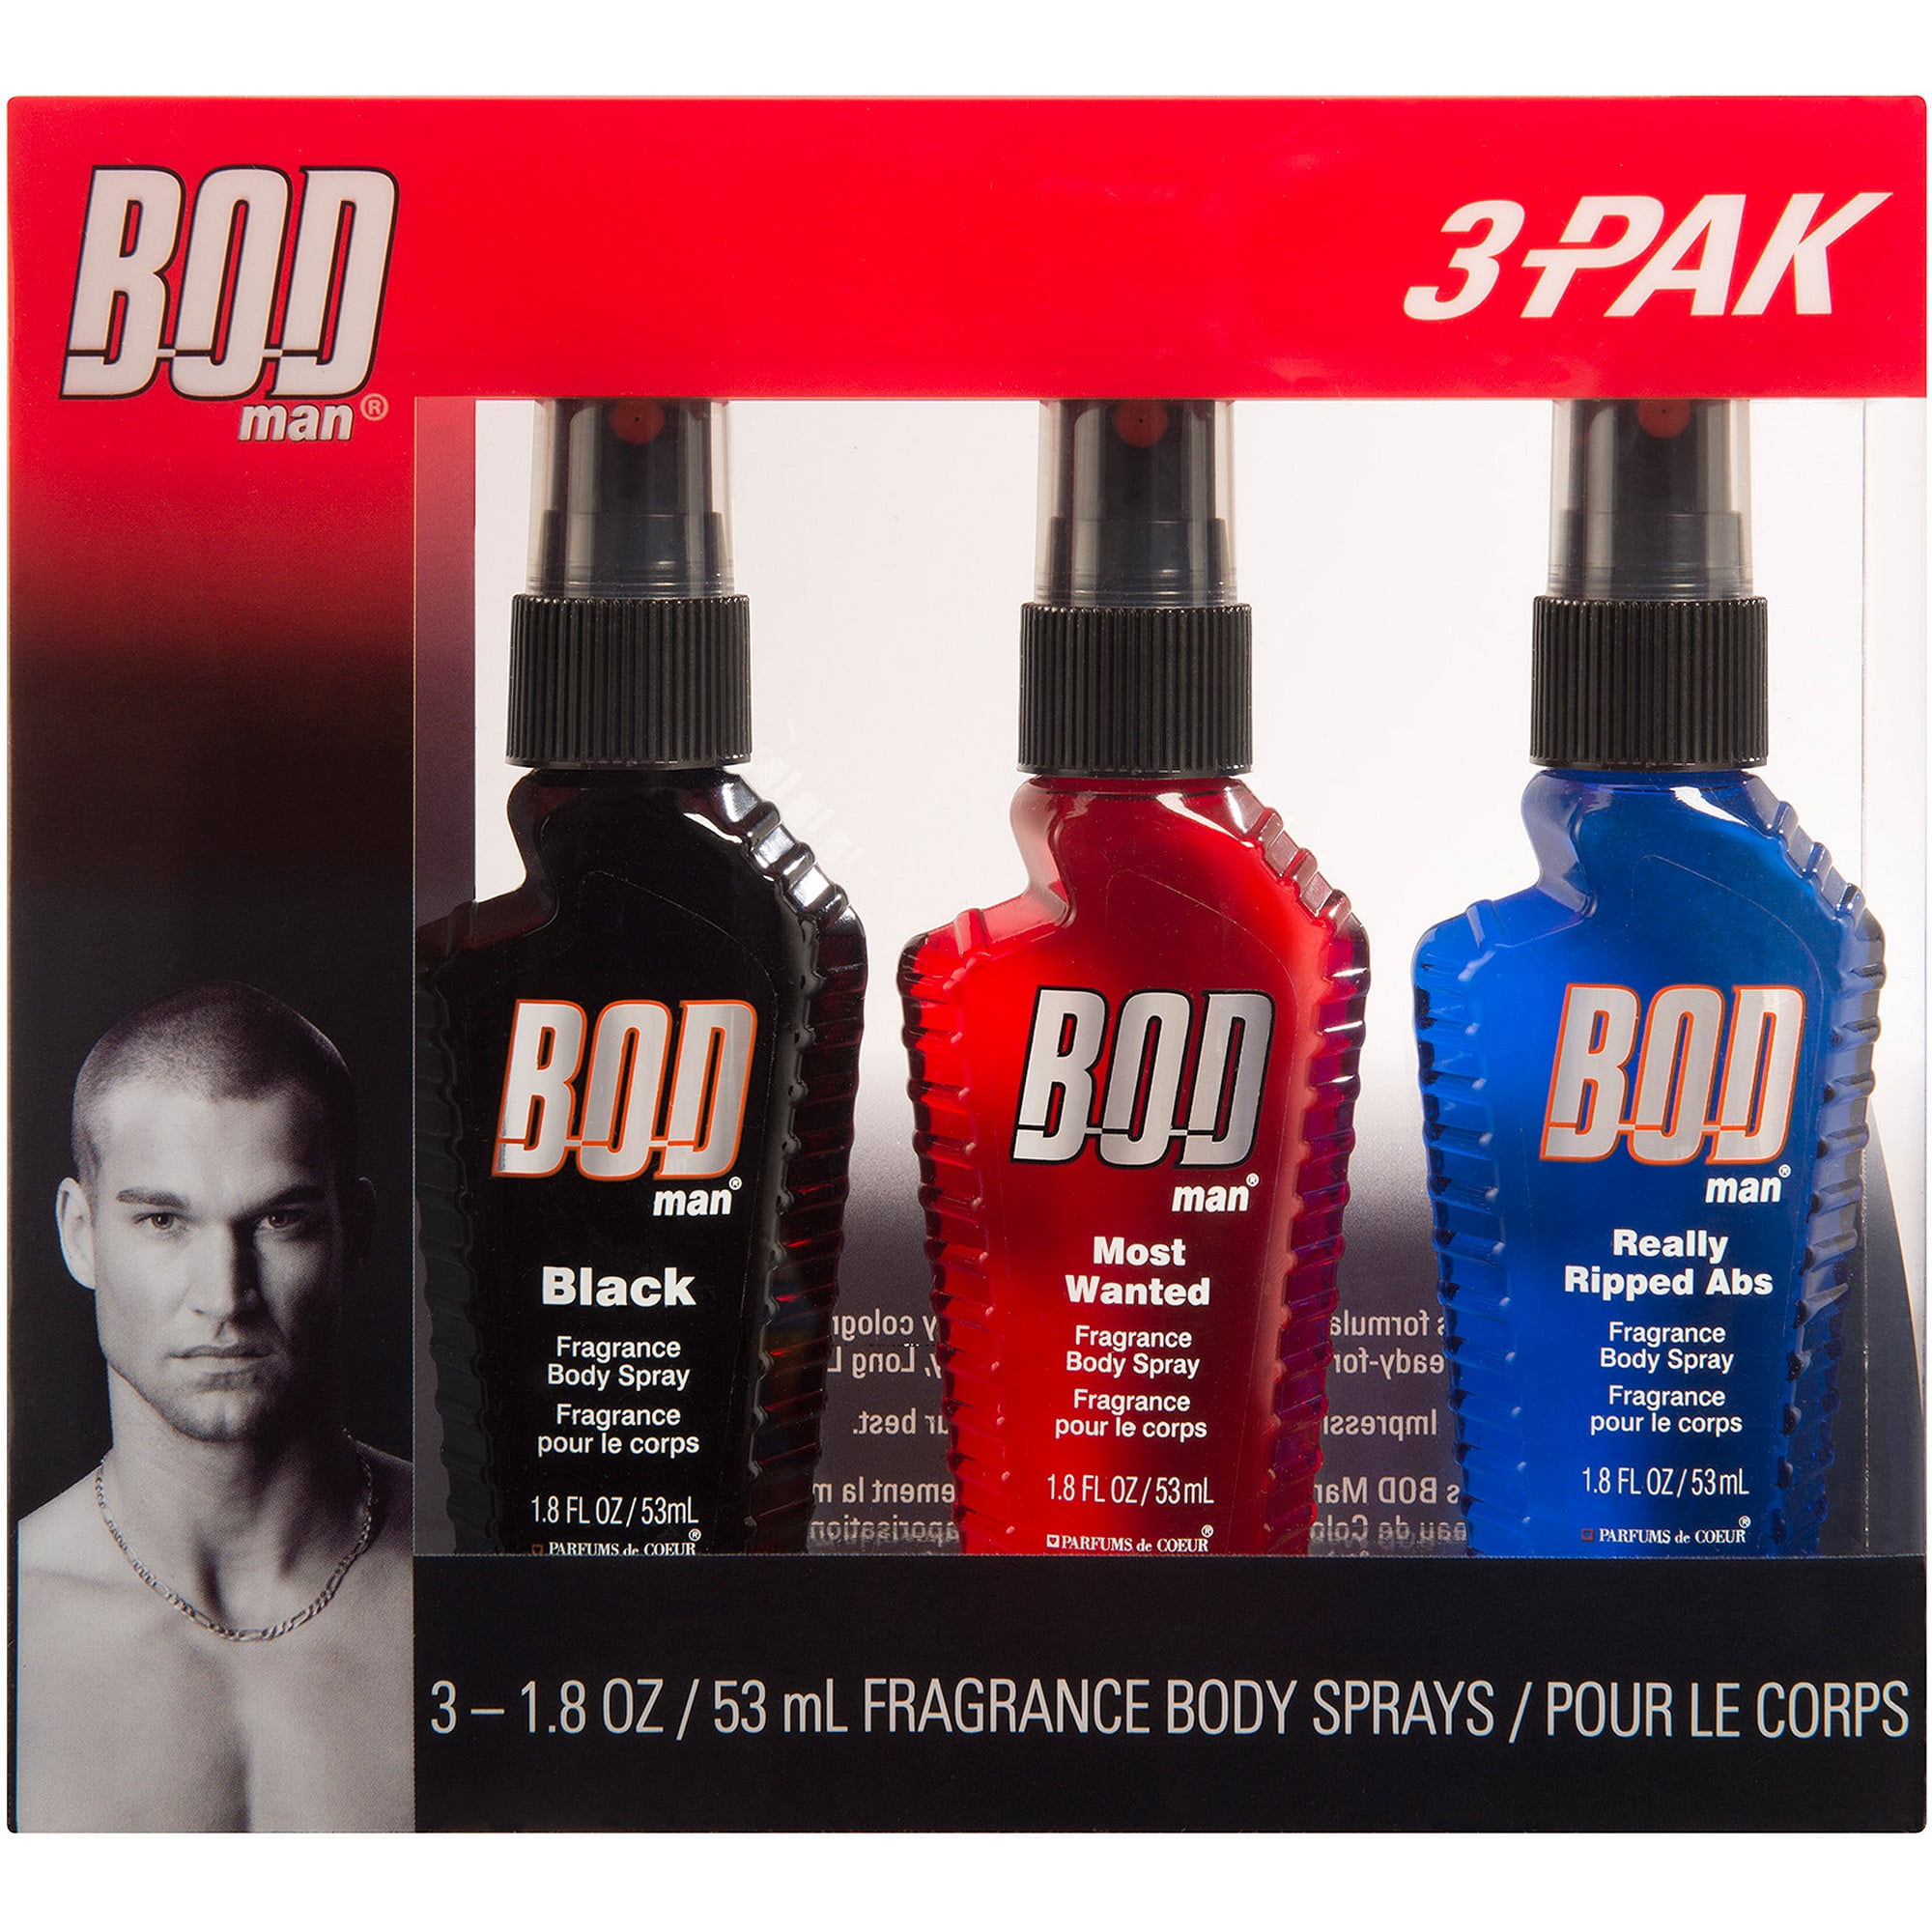 BOD Man Black/Most Wanted/Really Ripped Abs Fragrance Body Sprays, 1.8 ...